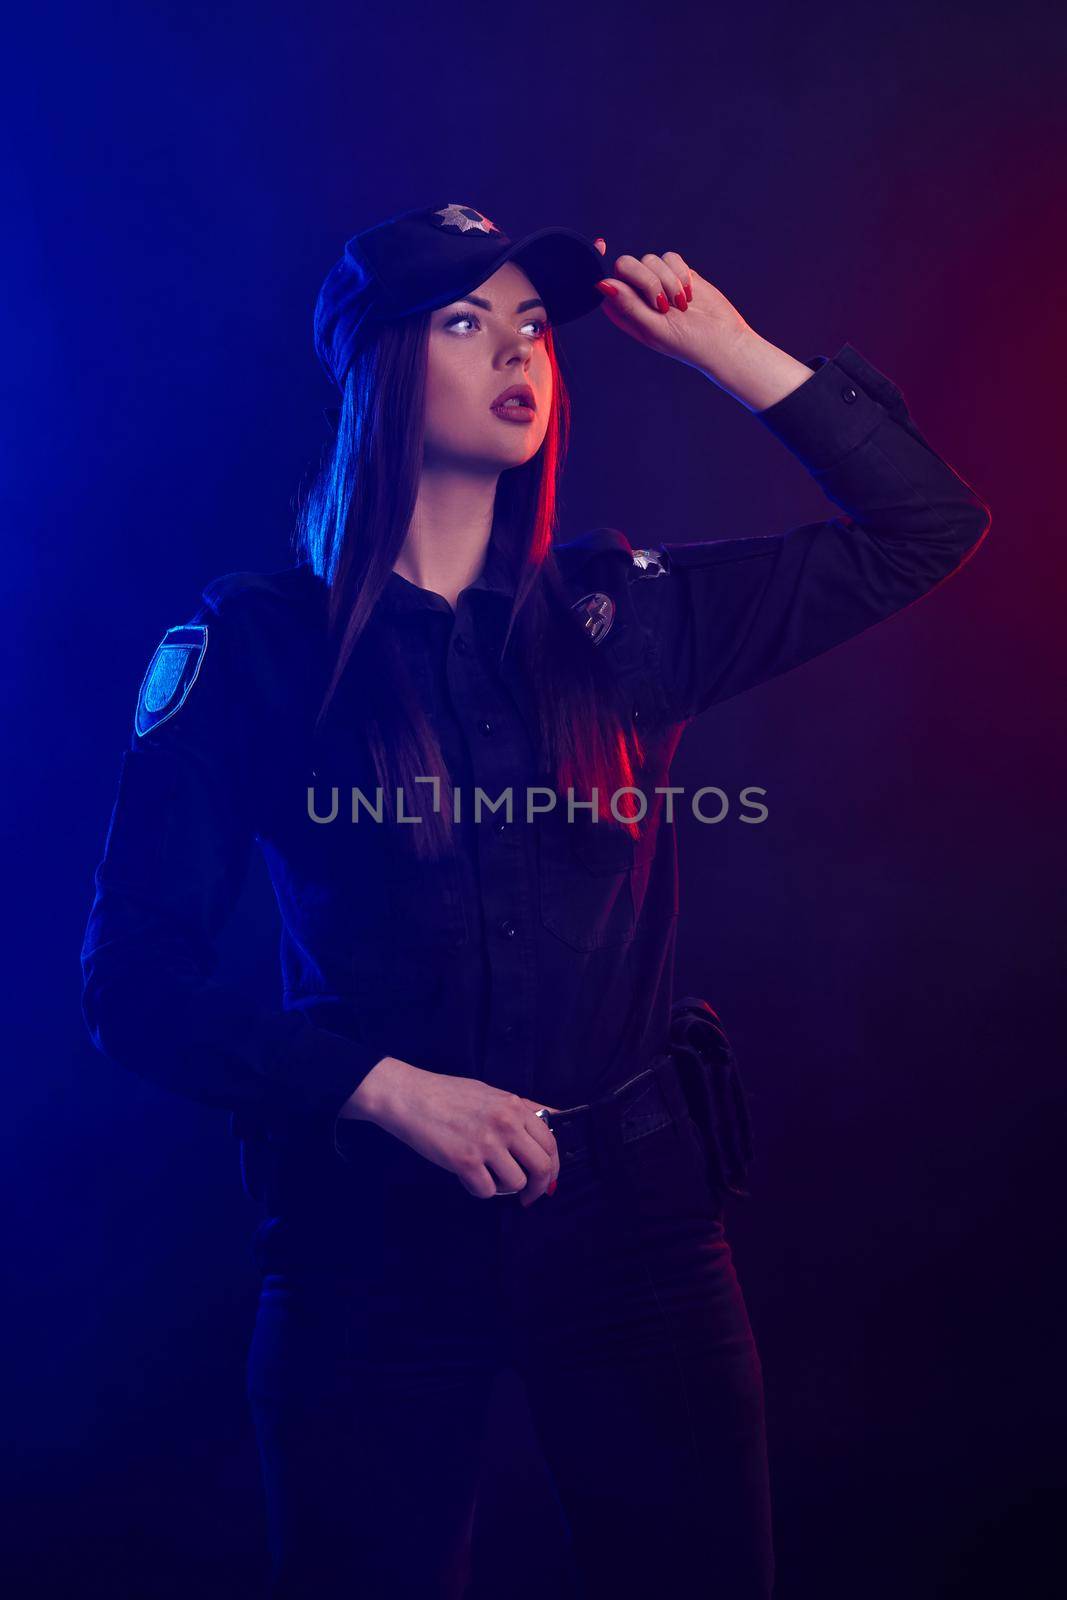 Redheaded lady police officer in a dark uniform, with bright make-up, is holding her cap looking away against a black background with red and blue backlighting. Defender of citizens is ready to enforce a law and stop a crime.